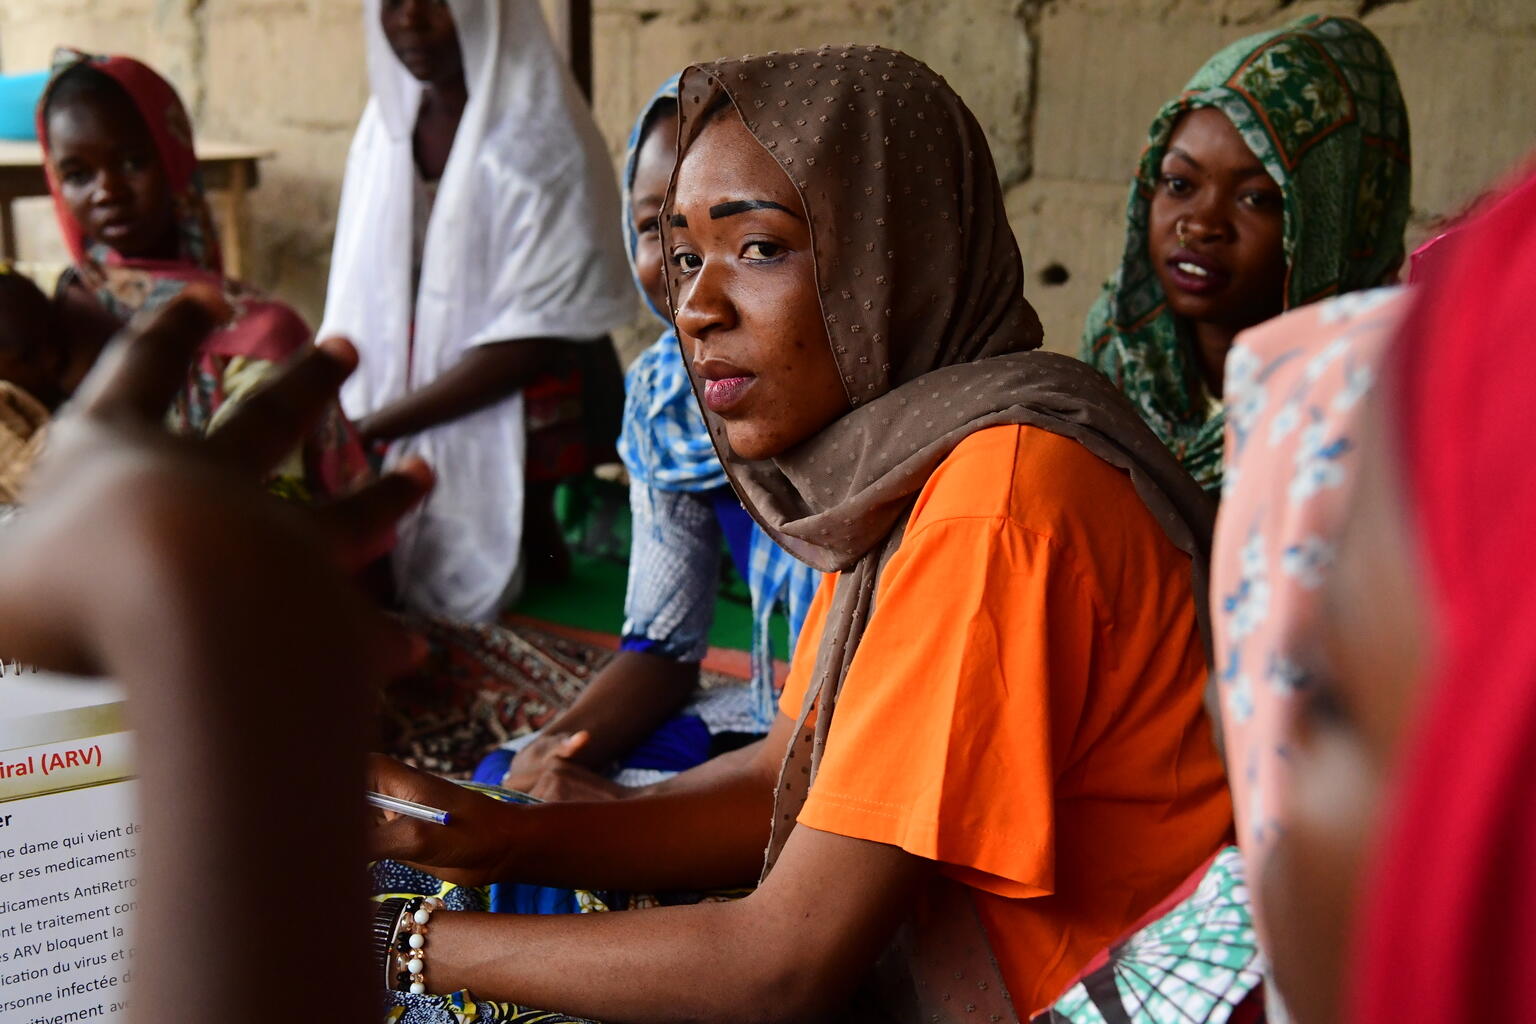 A community program in Chad engaging adolescent girls to promote SRH